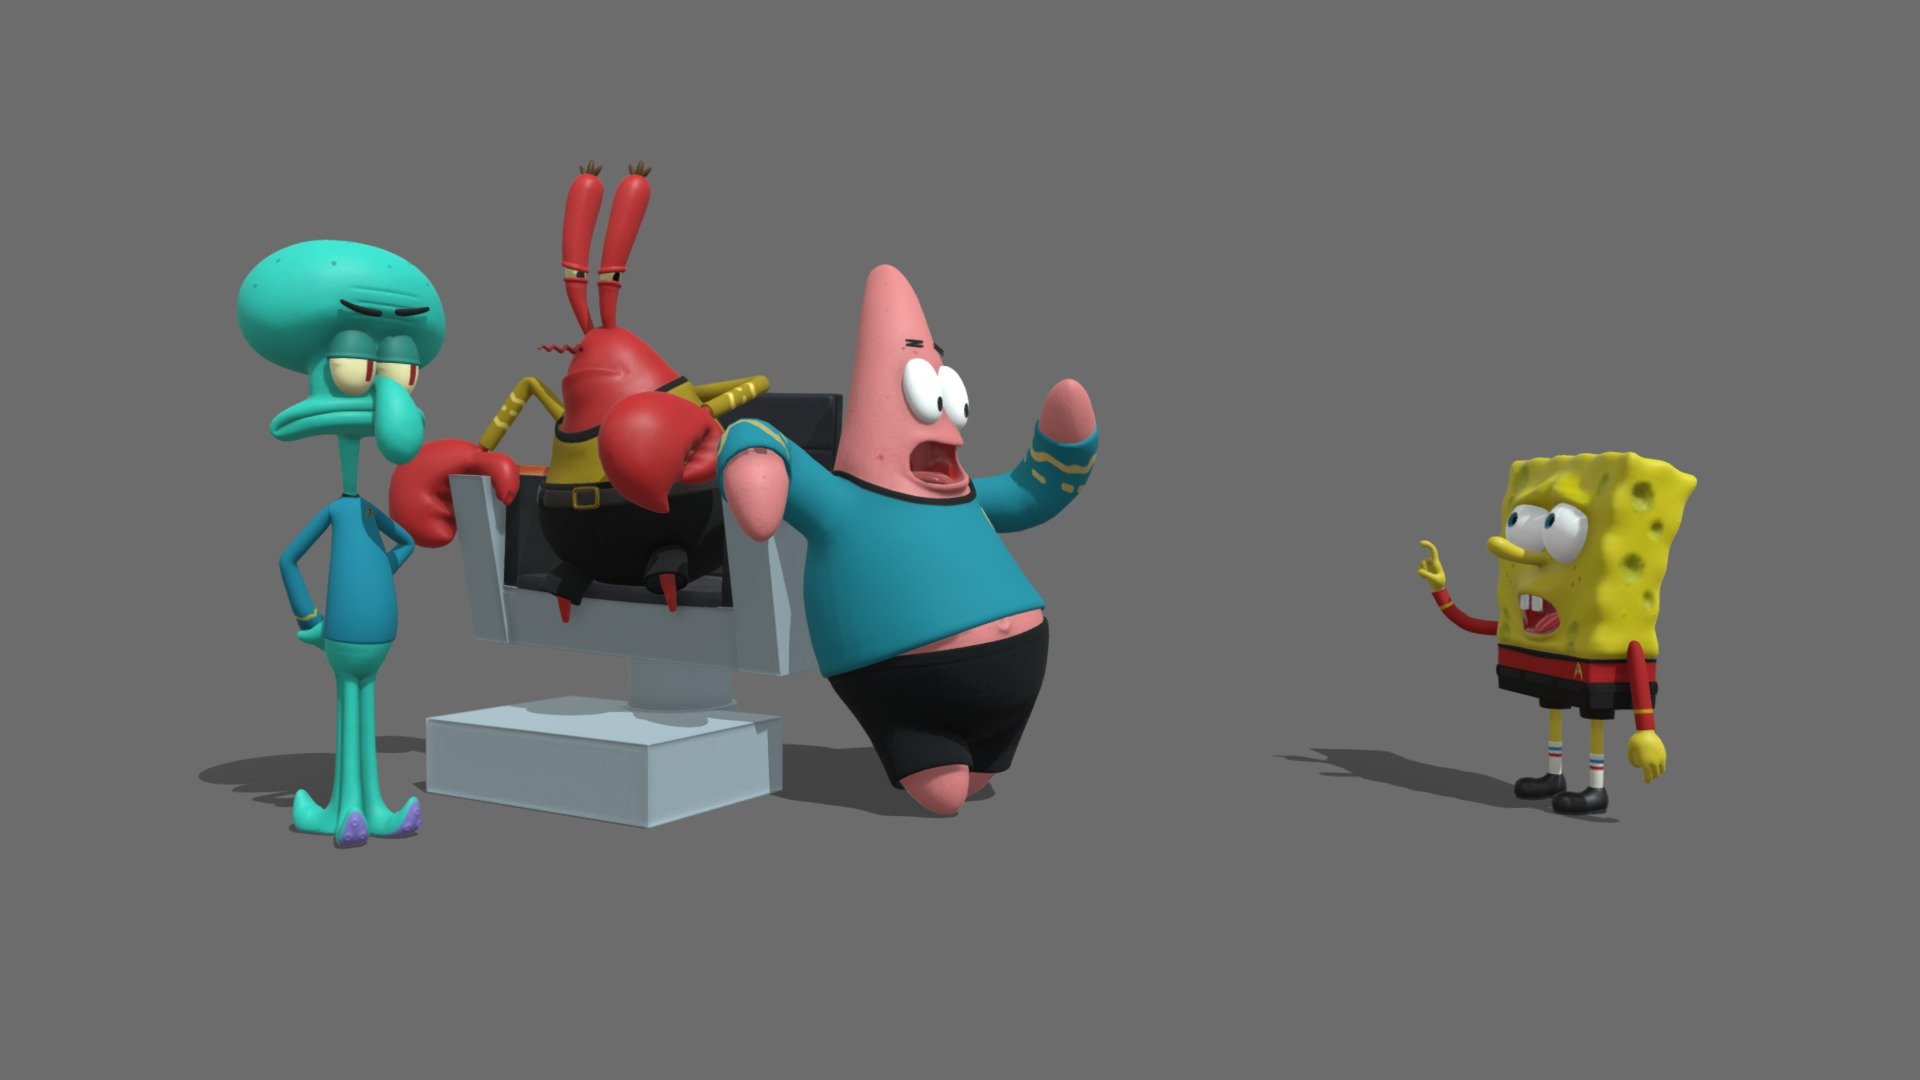 I wanted to try modeling something really cartoony for once for more experimentation, but wasn't sure exactly what. Then one of my friends gave me an idea for a crossover of spongebob and star trek. It sounded really cool, and this was the result from that idea.
Modeled with Zbrush and Maya. Textured with Substance Painter 3d model